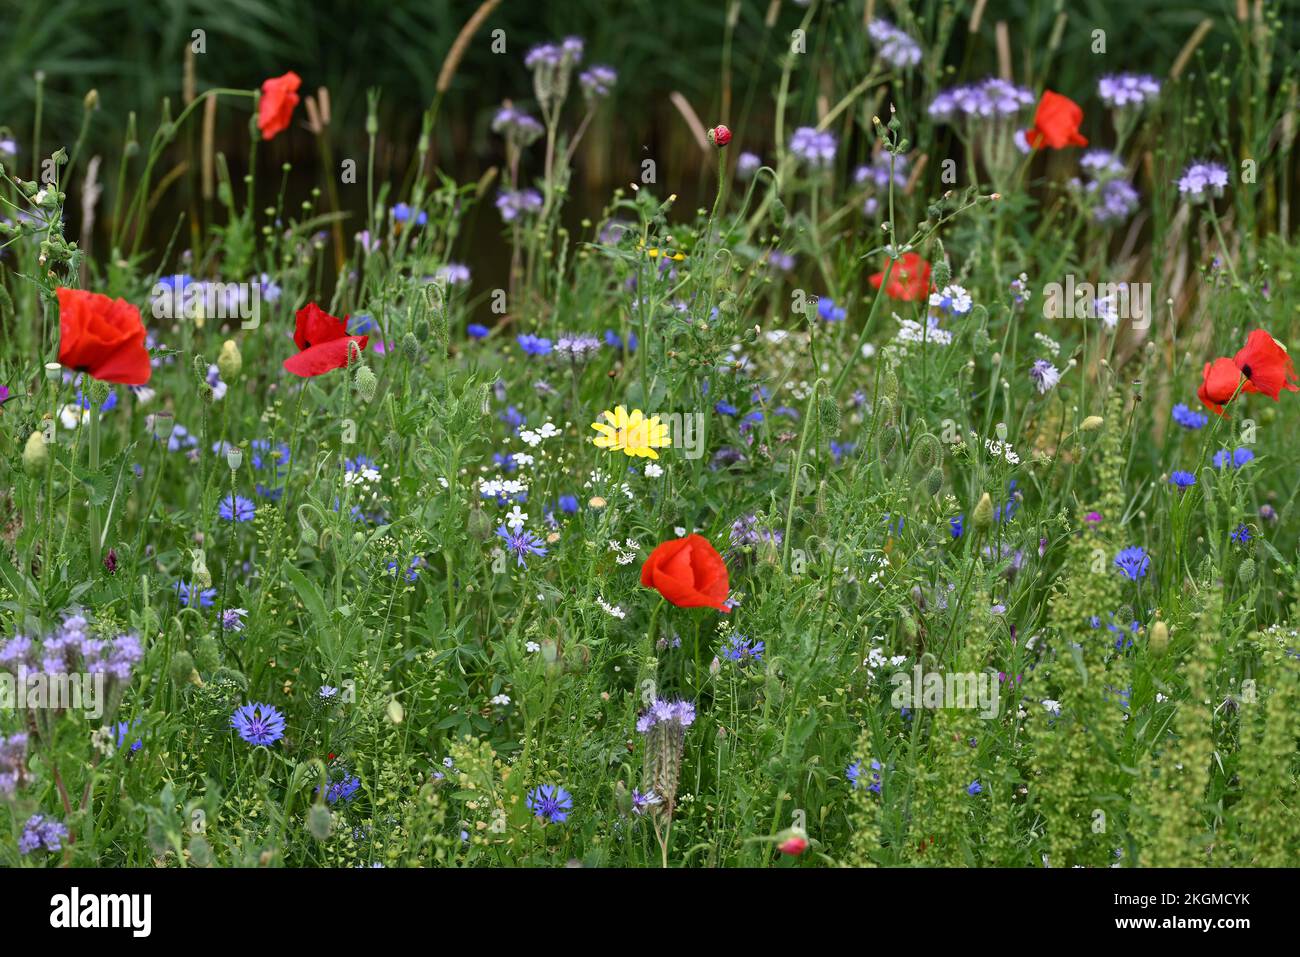 Roadside flowers poppies and other anual flowers. Stock Photo